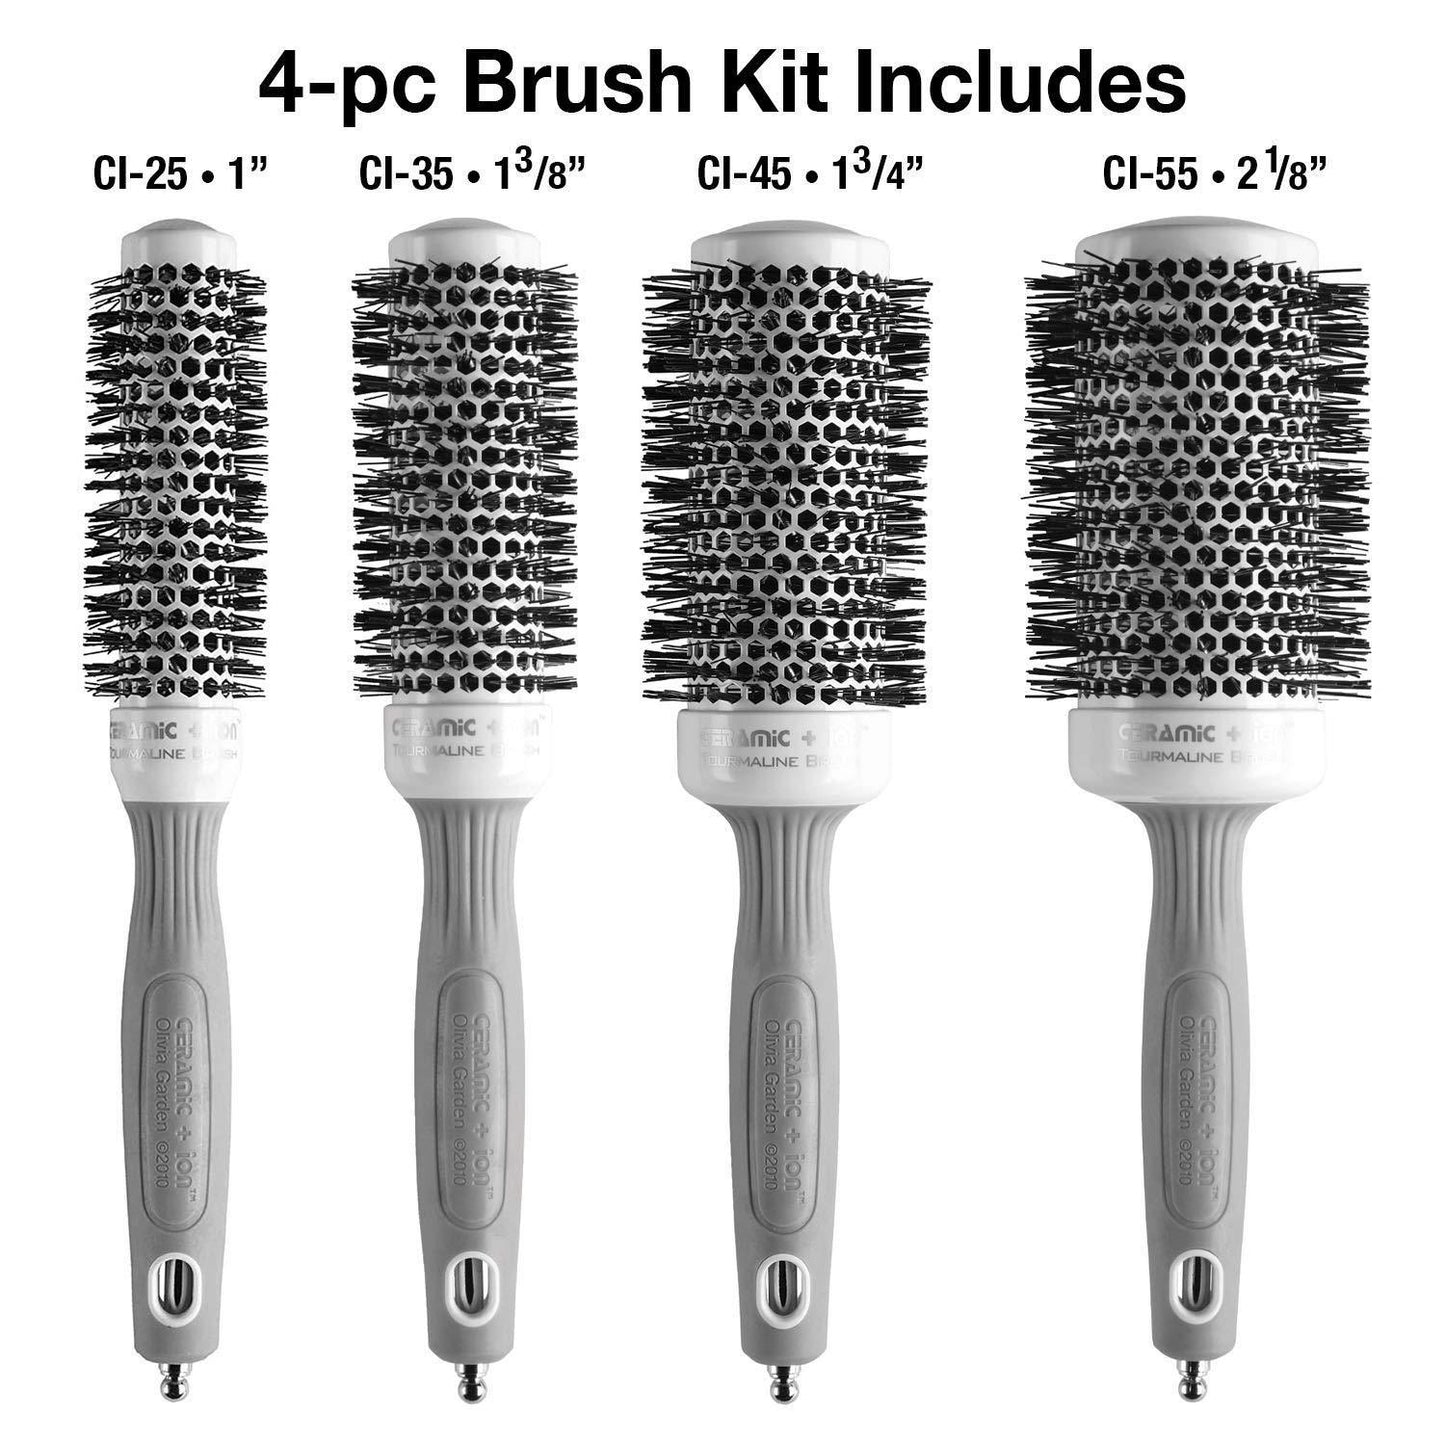 Ceramic + ion Thermal Brush - Box Deal | CI-BOX01 COMBS & BRUSHES OLIVIA GARDEN 